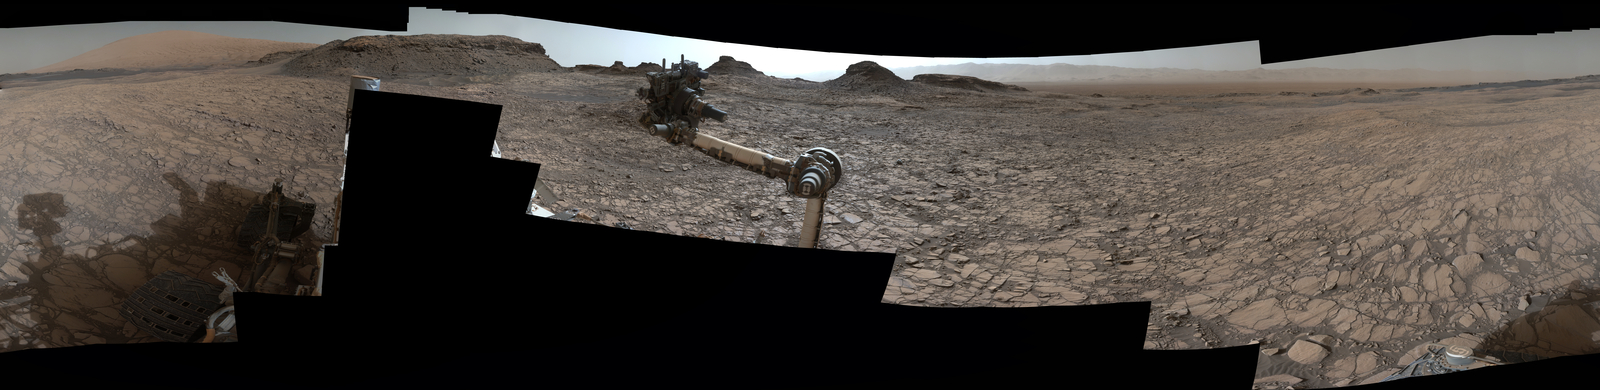 This 360-degree vista was acquired on Aug. 5, 2016, by the Mastcam on NASA's Curiosity Mars rover as the rover neared features called "Murray Buttes" on lower Mount Sharp. The dark, flat-topped mesa seen to the left of the rover's arm is about 50 feet high and, near the top, about 200 feet wide.